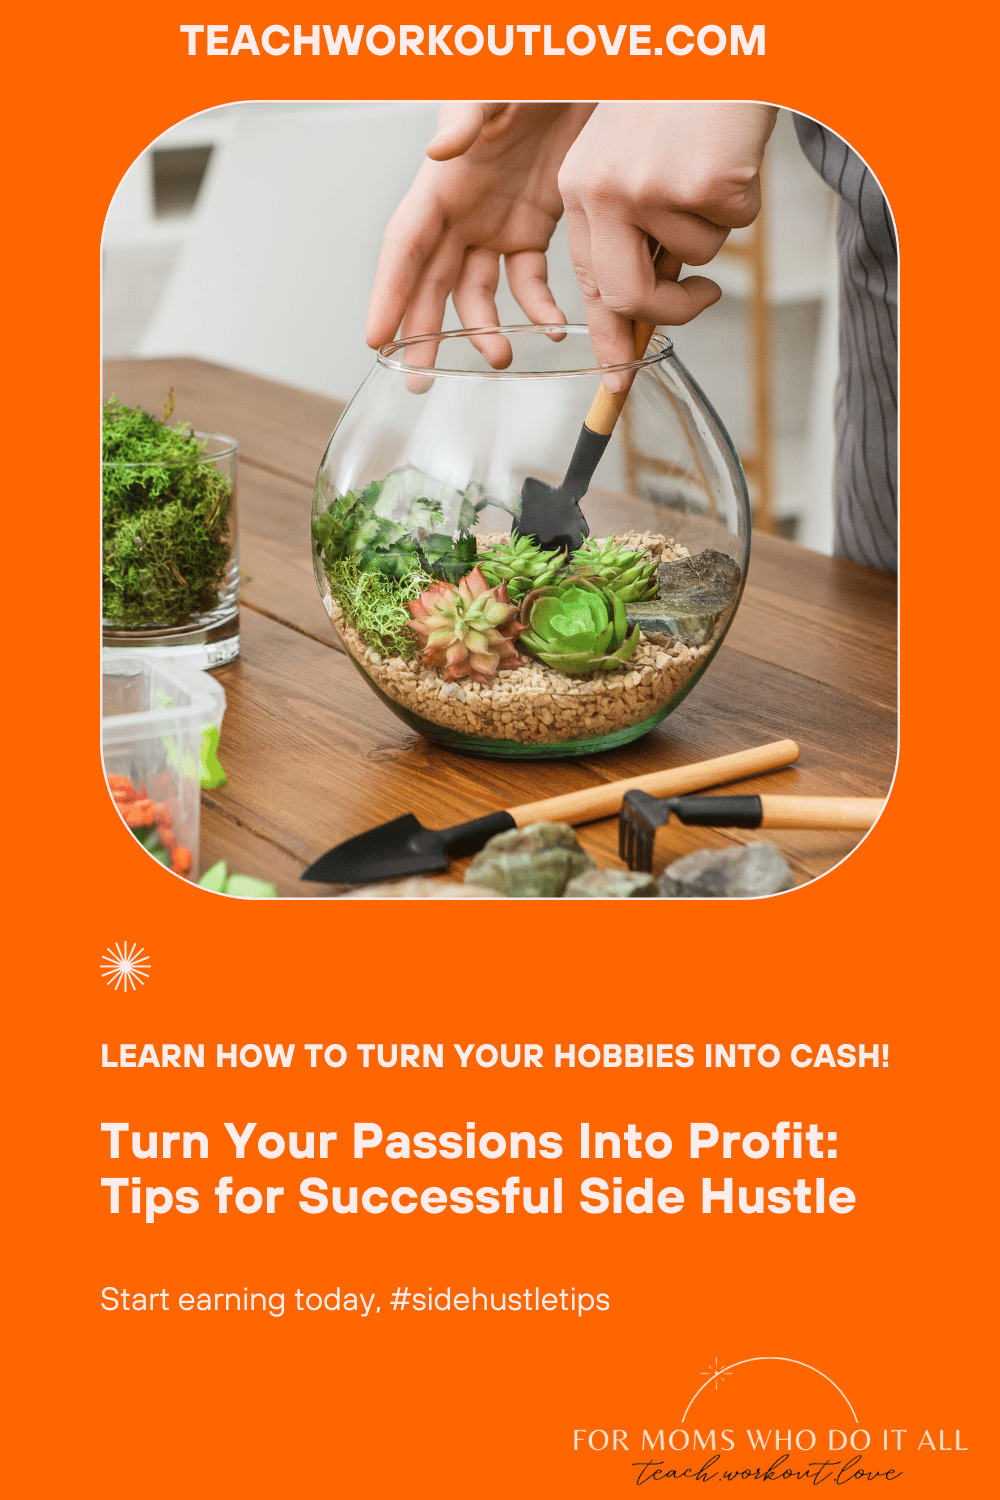 Tips for Turning Your Hobbies Into Profitable Side Hustles - TWL